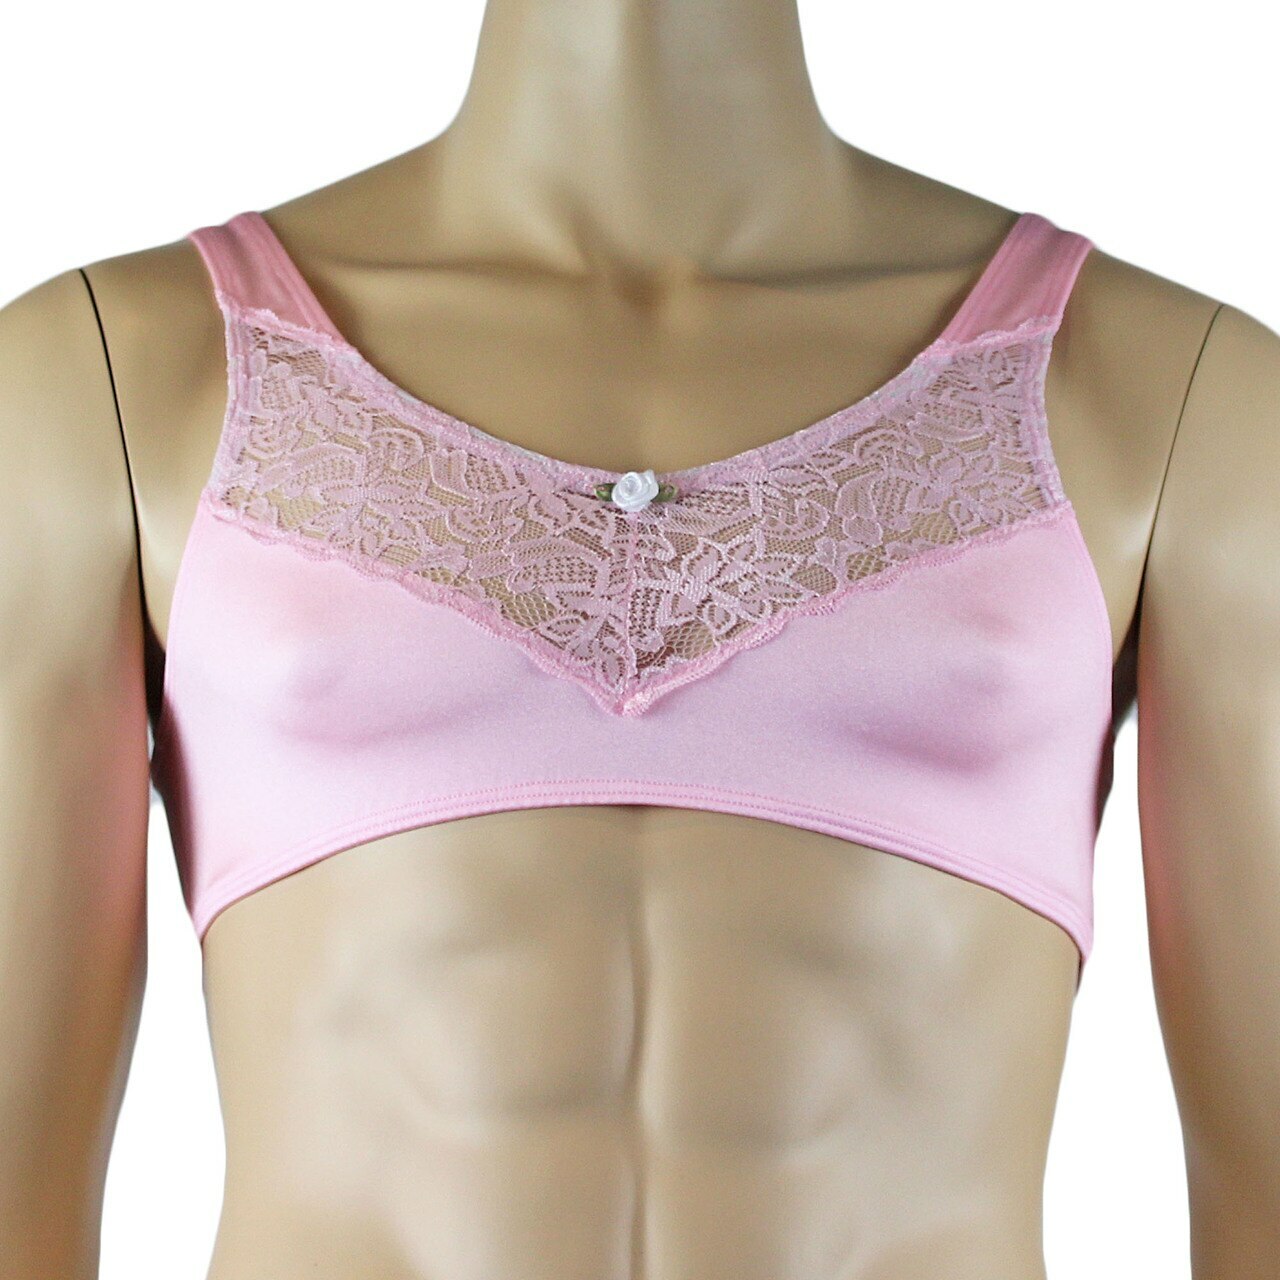 Male Penny Lingerie Bra Top with V Lace front and Pouch G string Light Pink